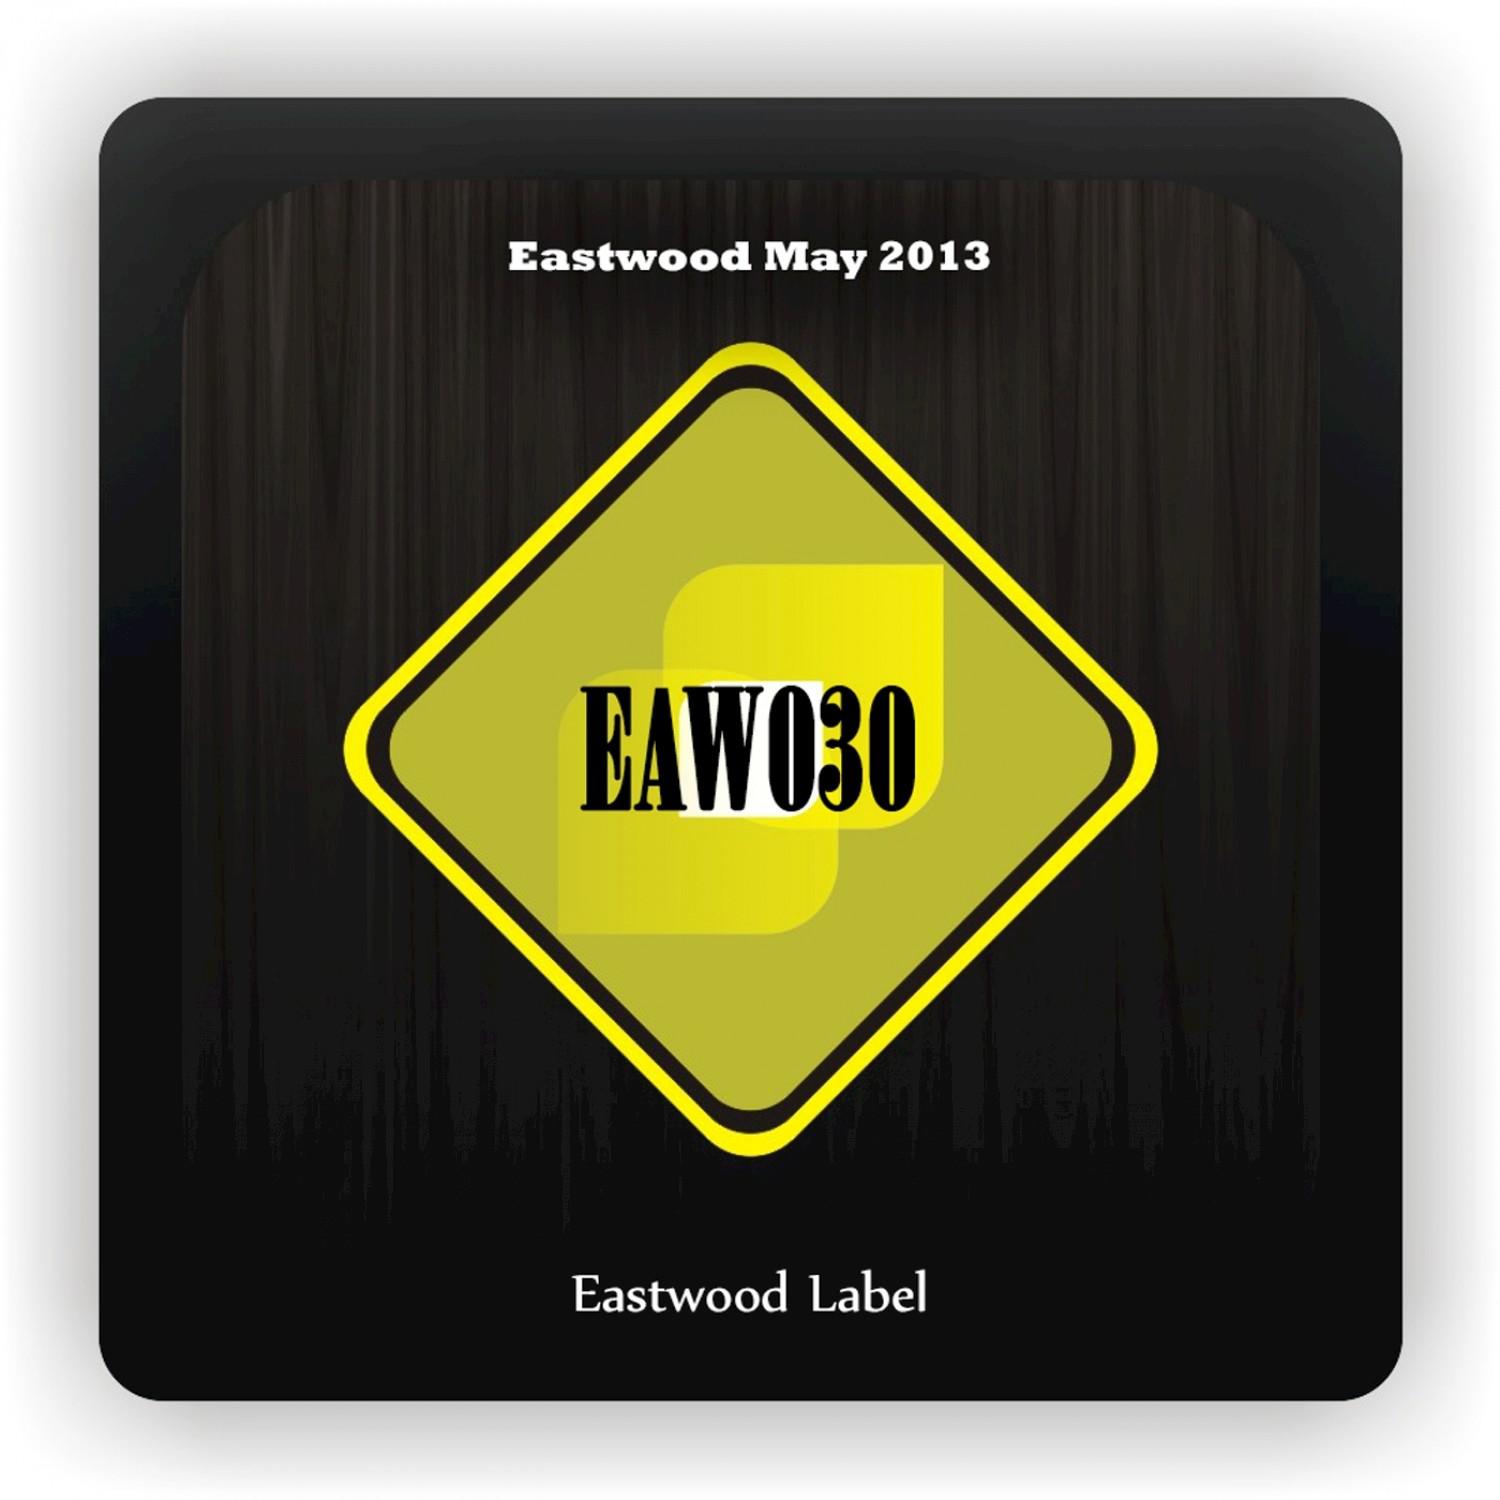 Eastwood May 2013